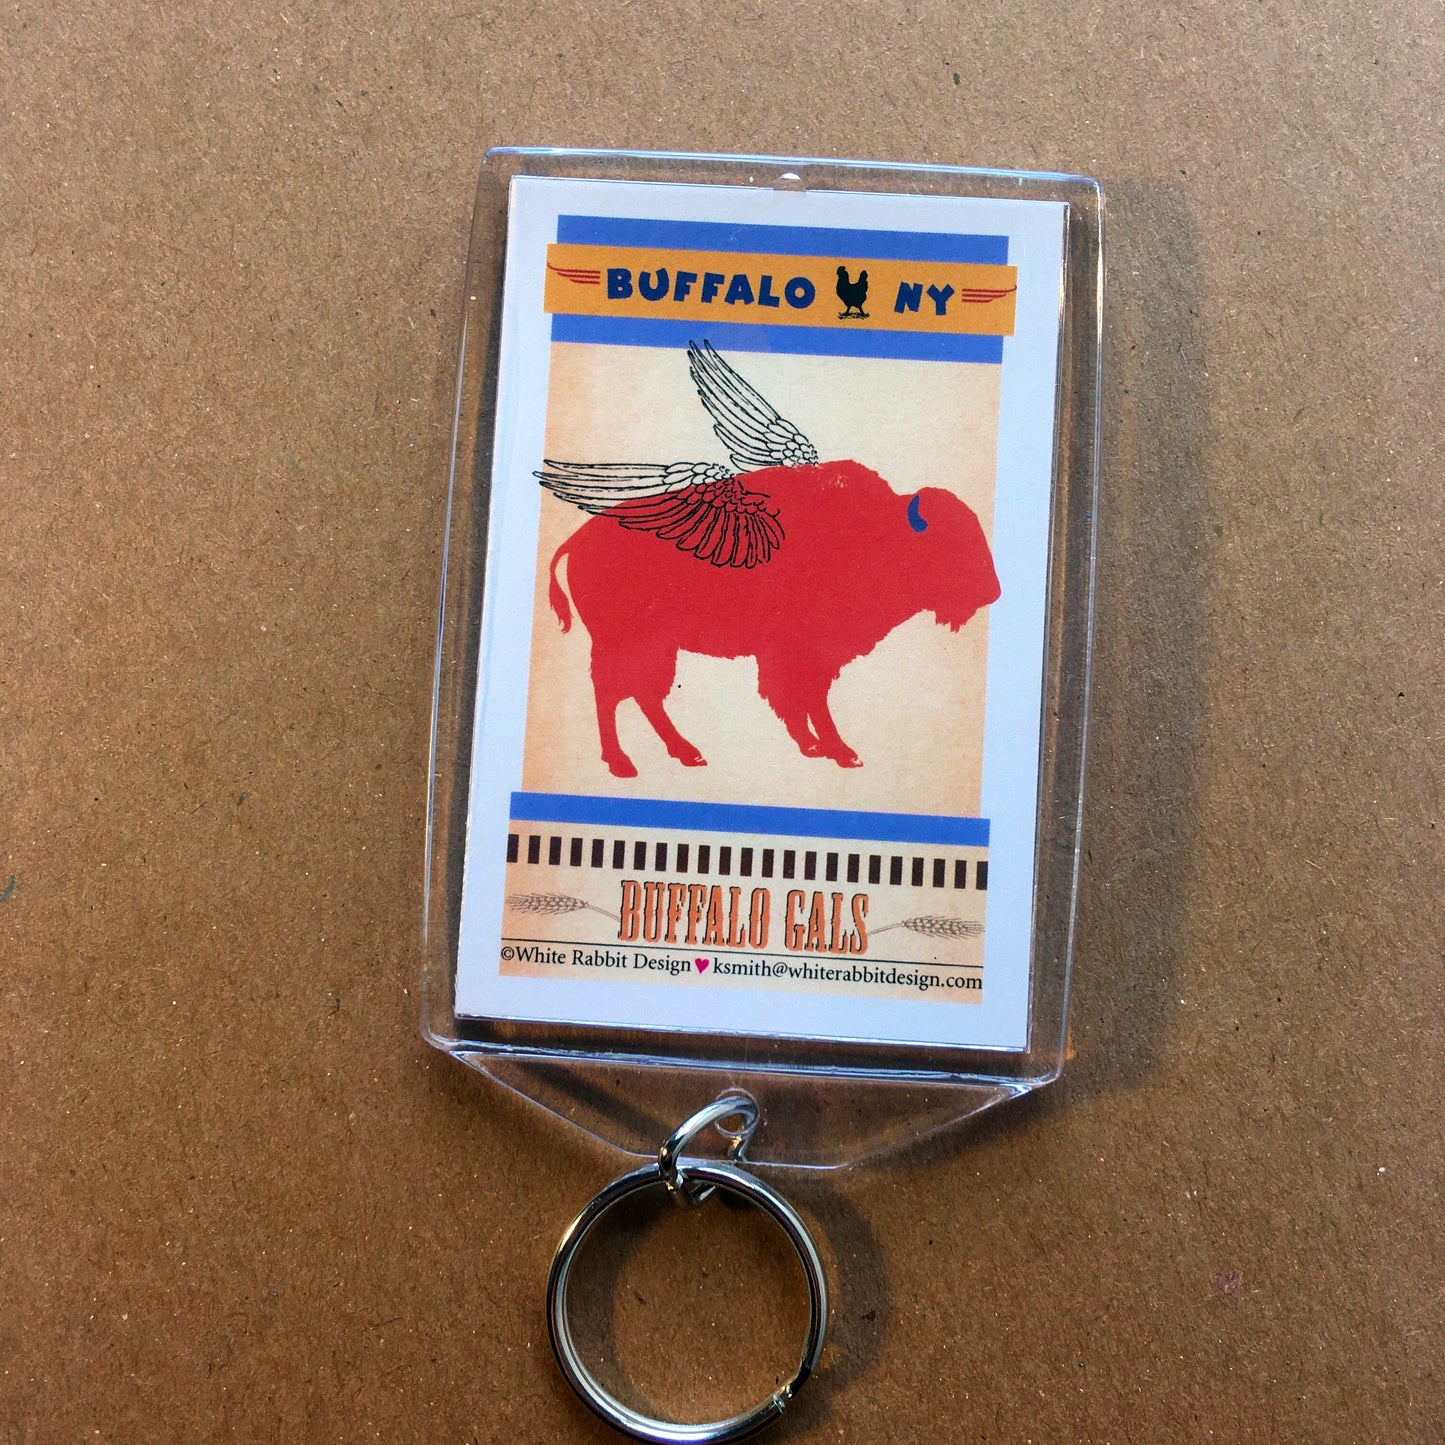 “Home of the Chicken Wing” keychain